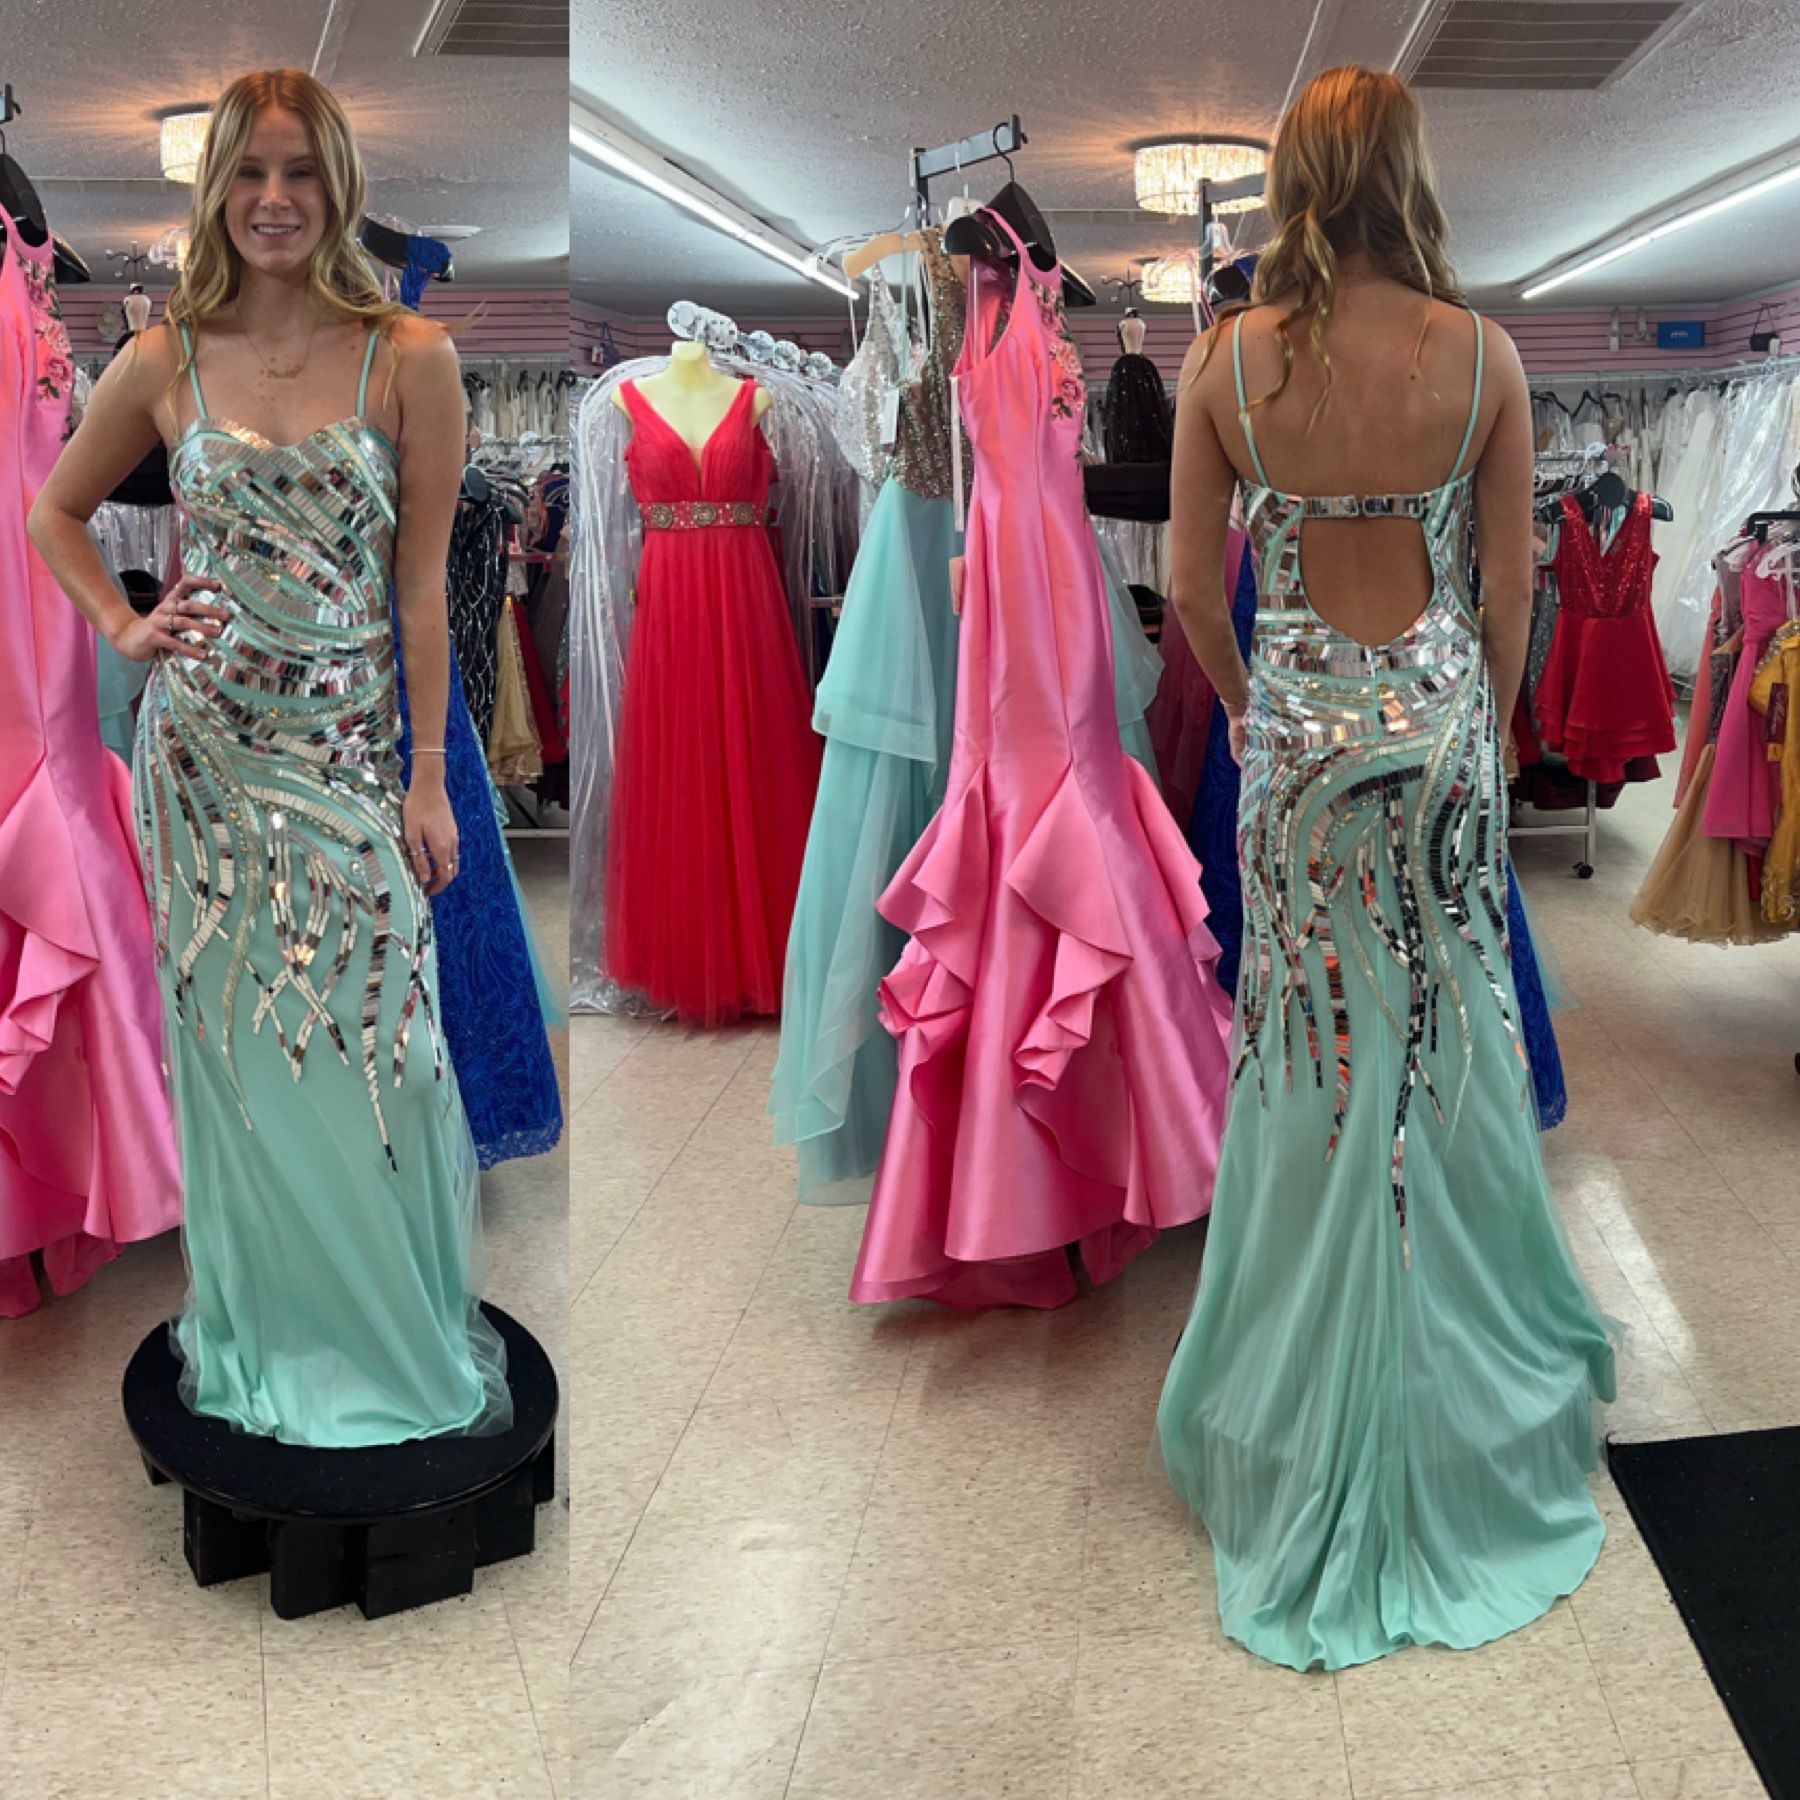 New With Tags Size 6 Blush Prom Dress $99